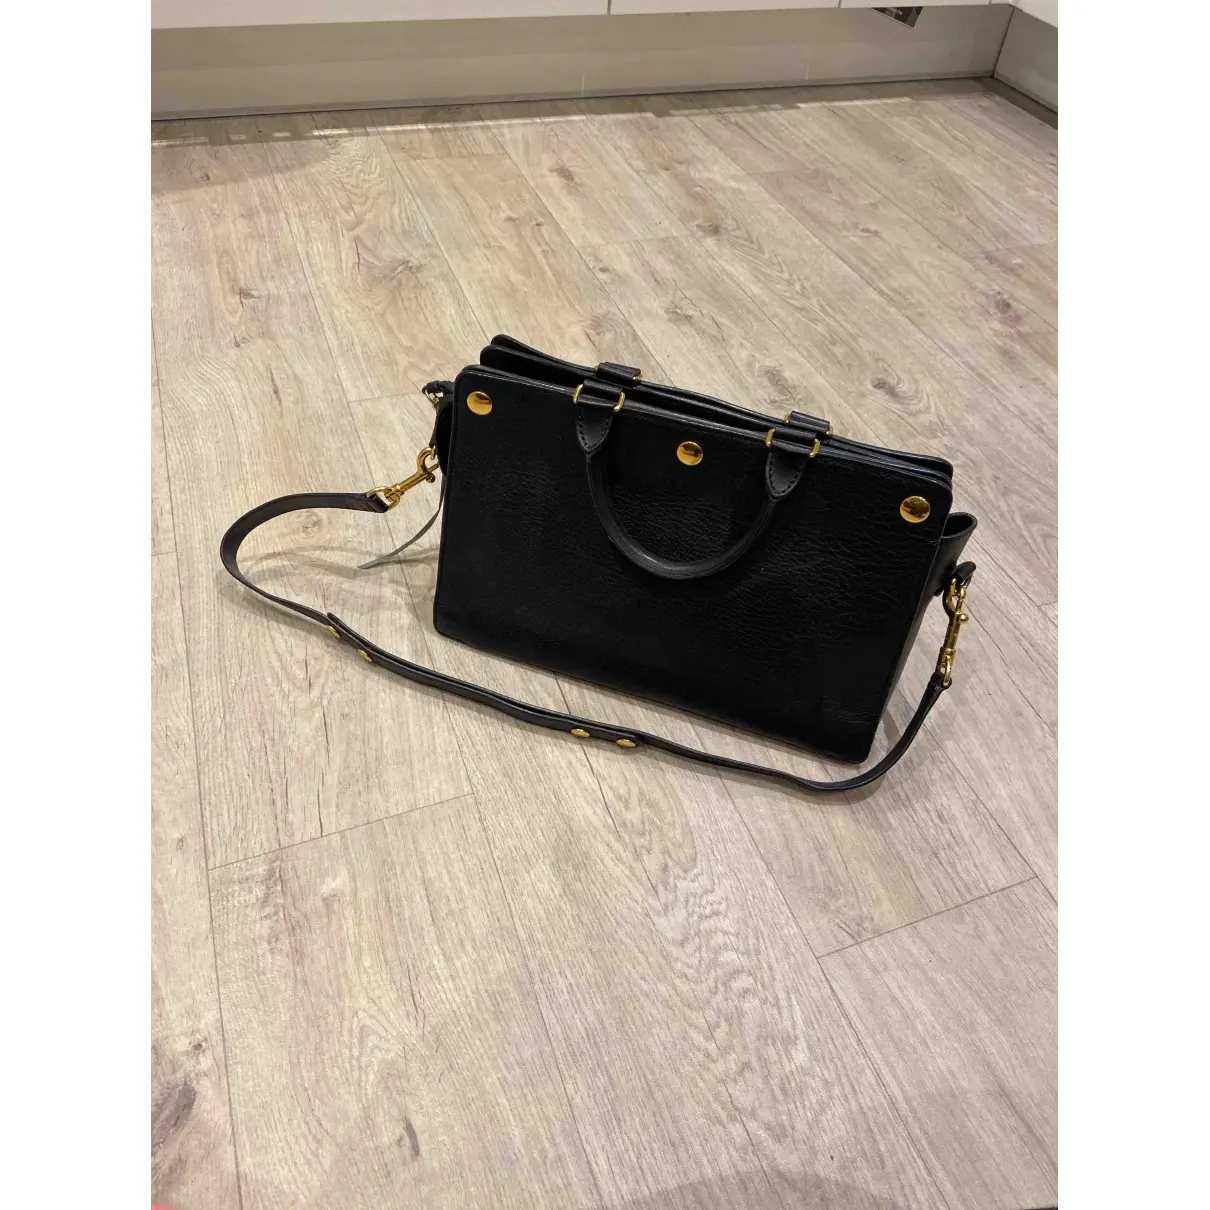 Buy Mulberry Leather crossbody bag online